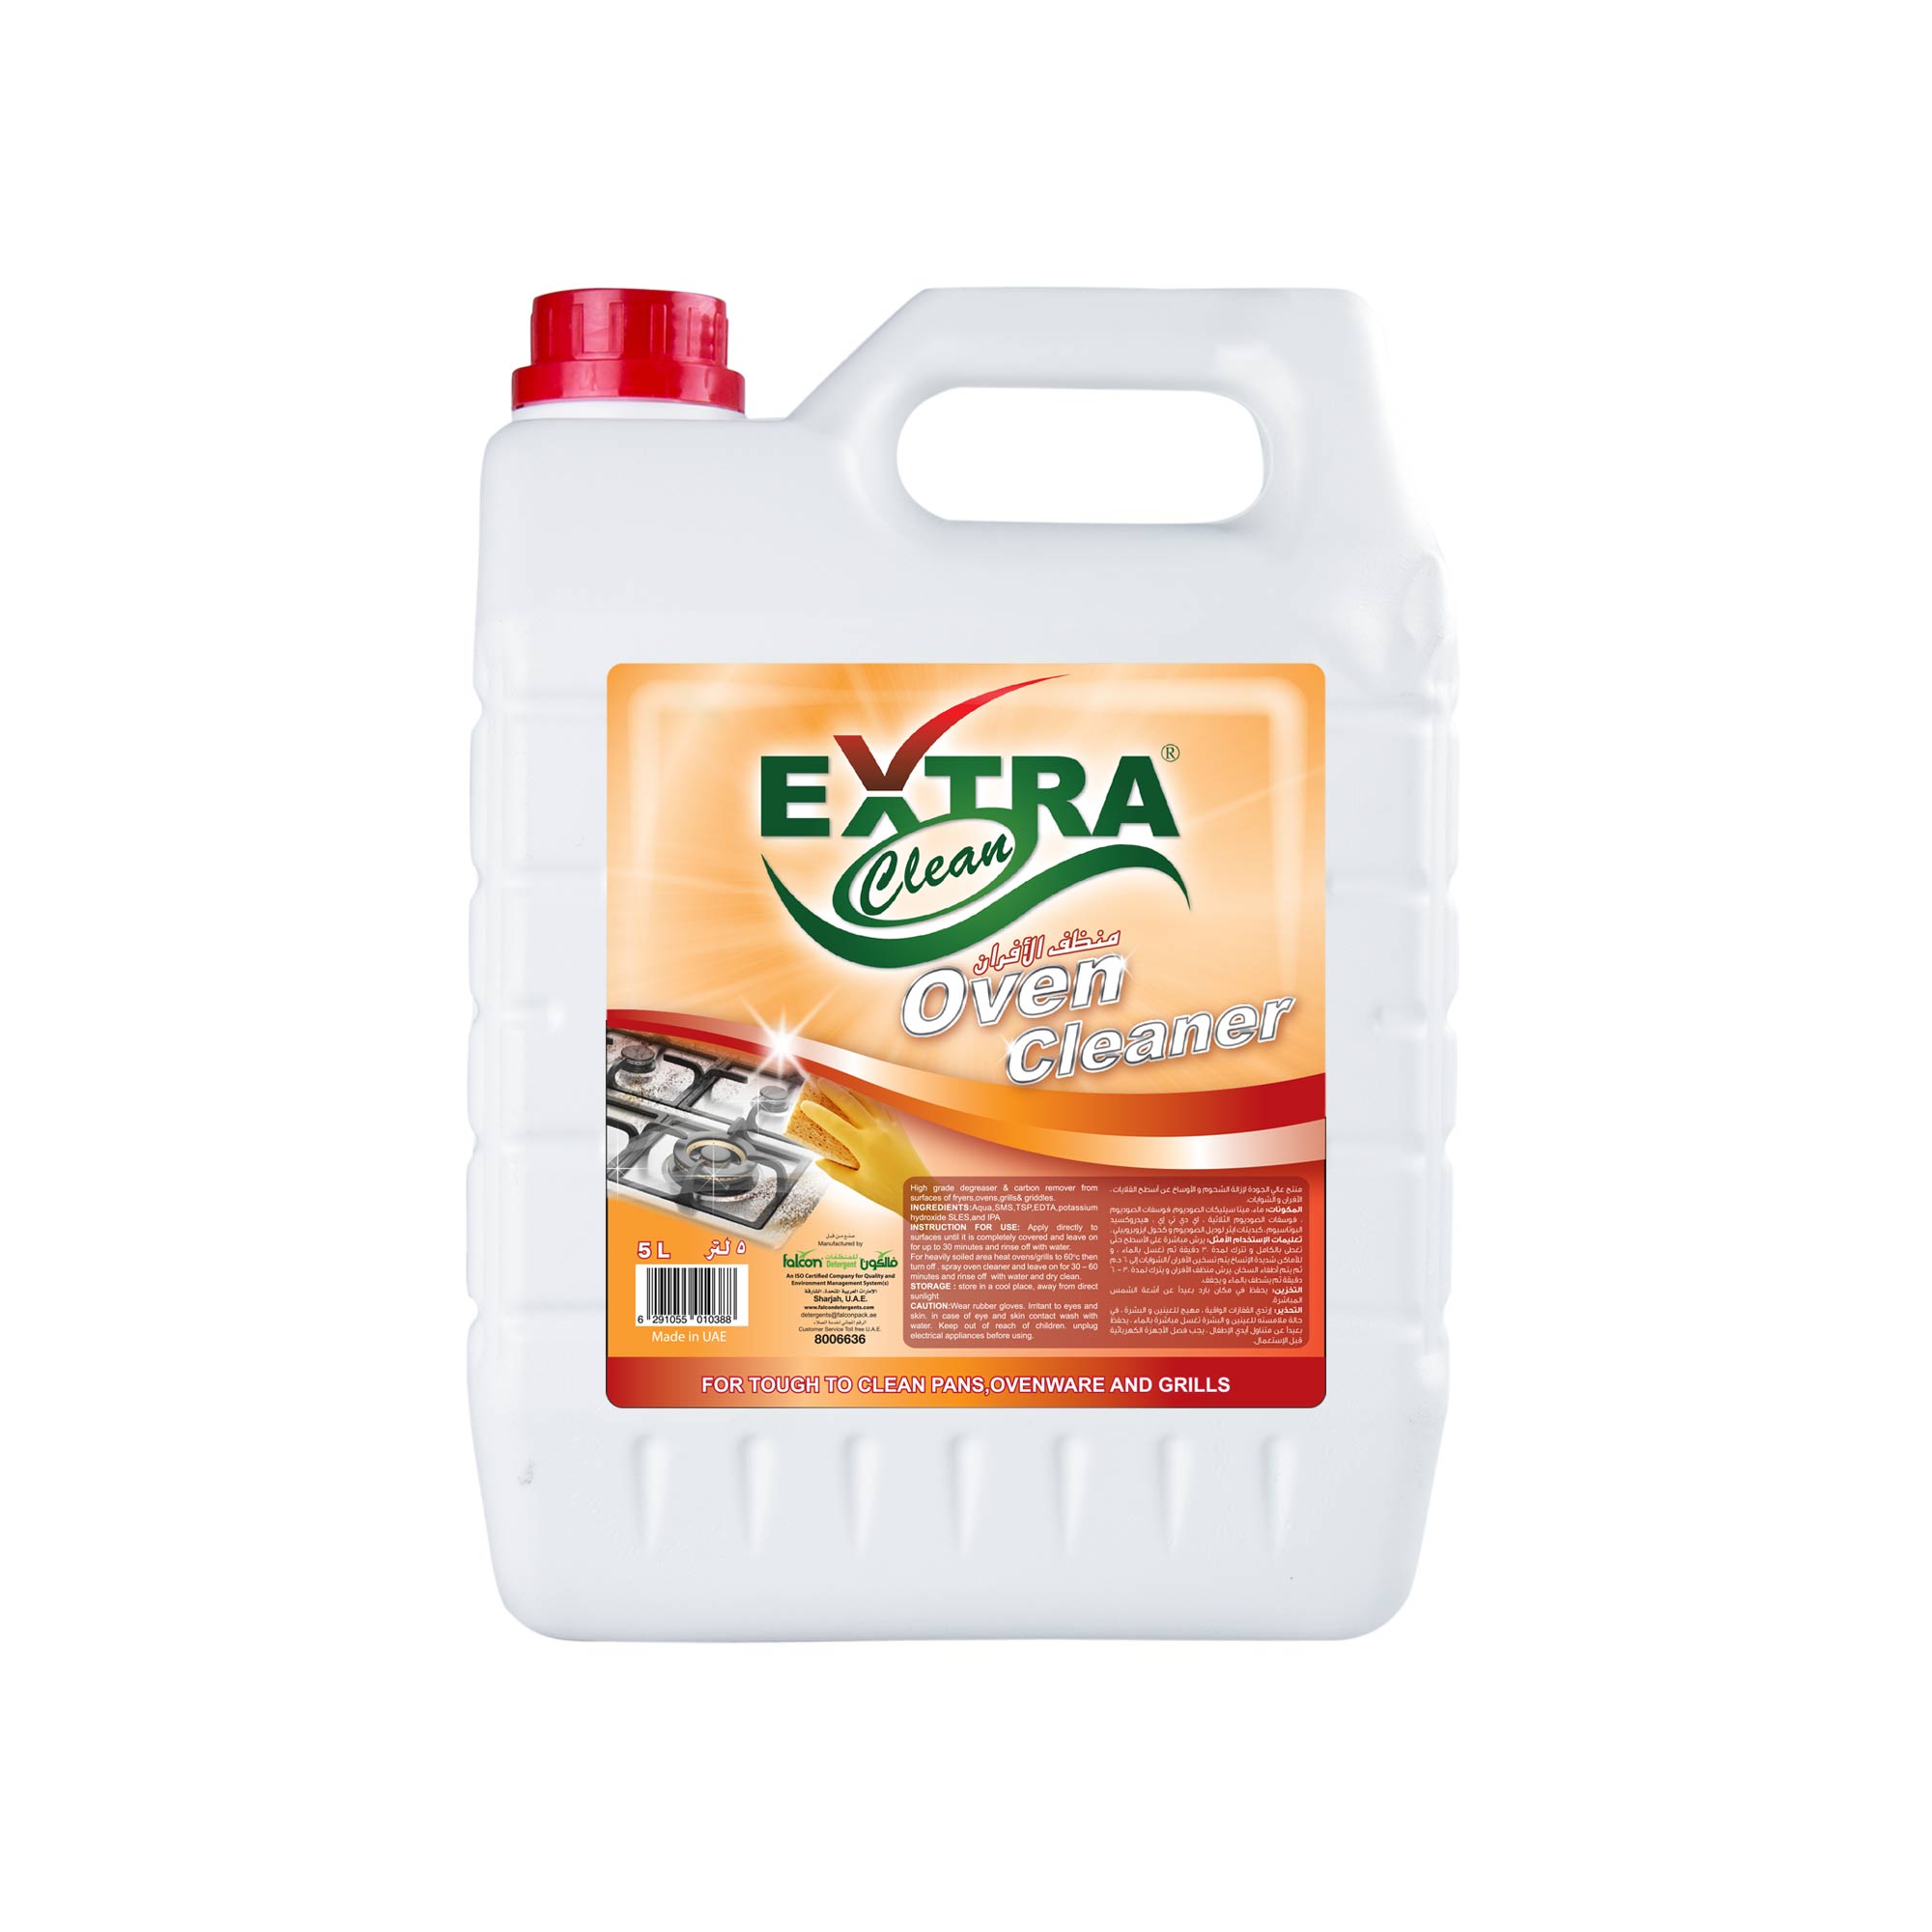 Extra Clean Oven Cleaner (5 Litre Refill)